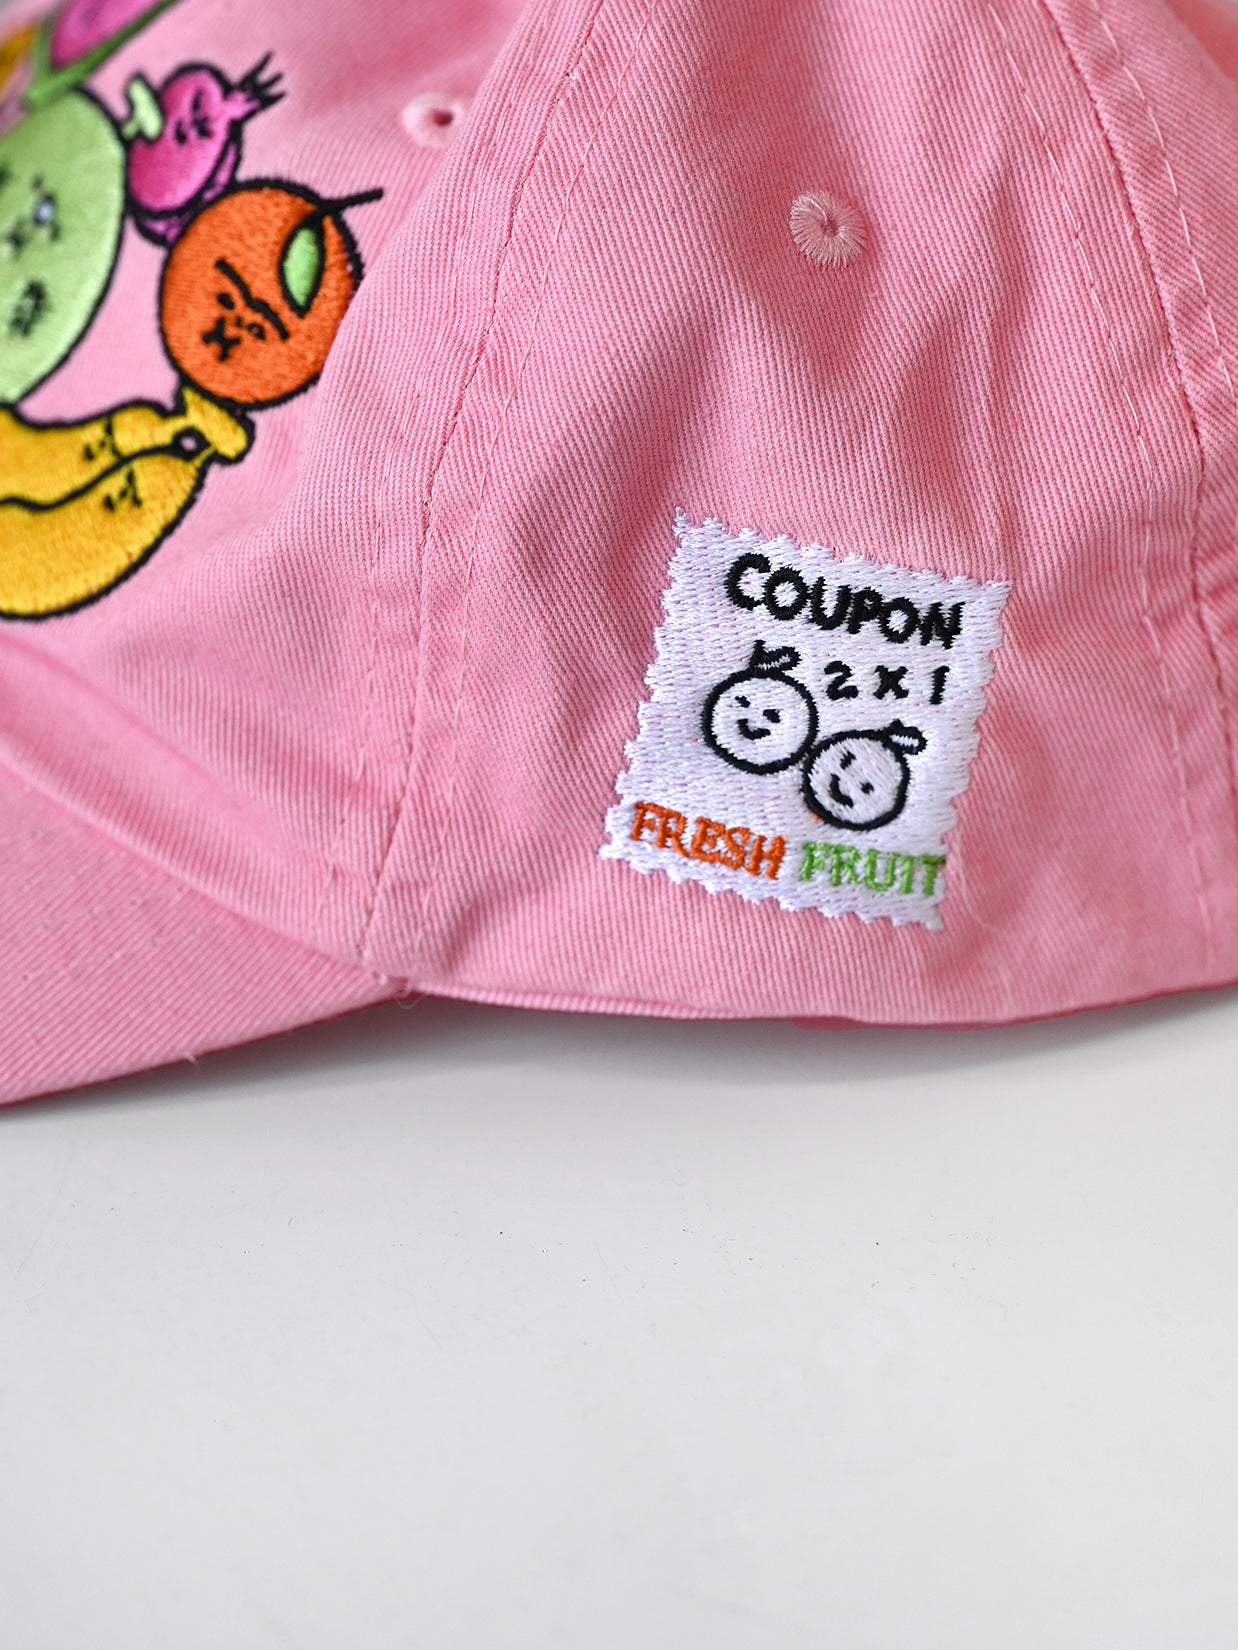 "Fresh Fruit" embroidered cap.